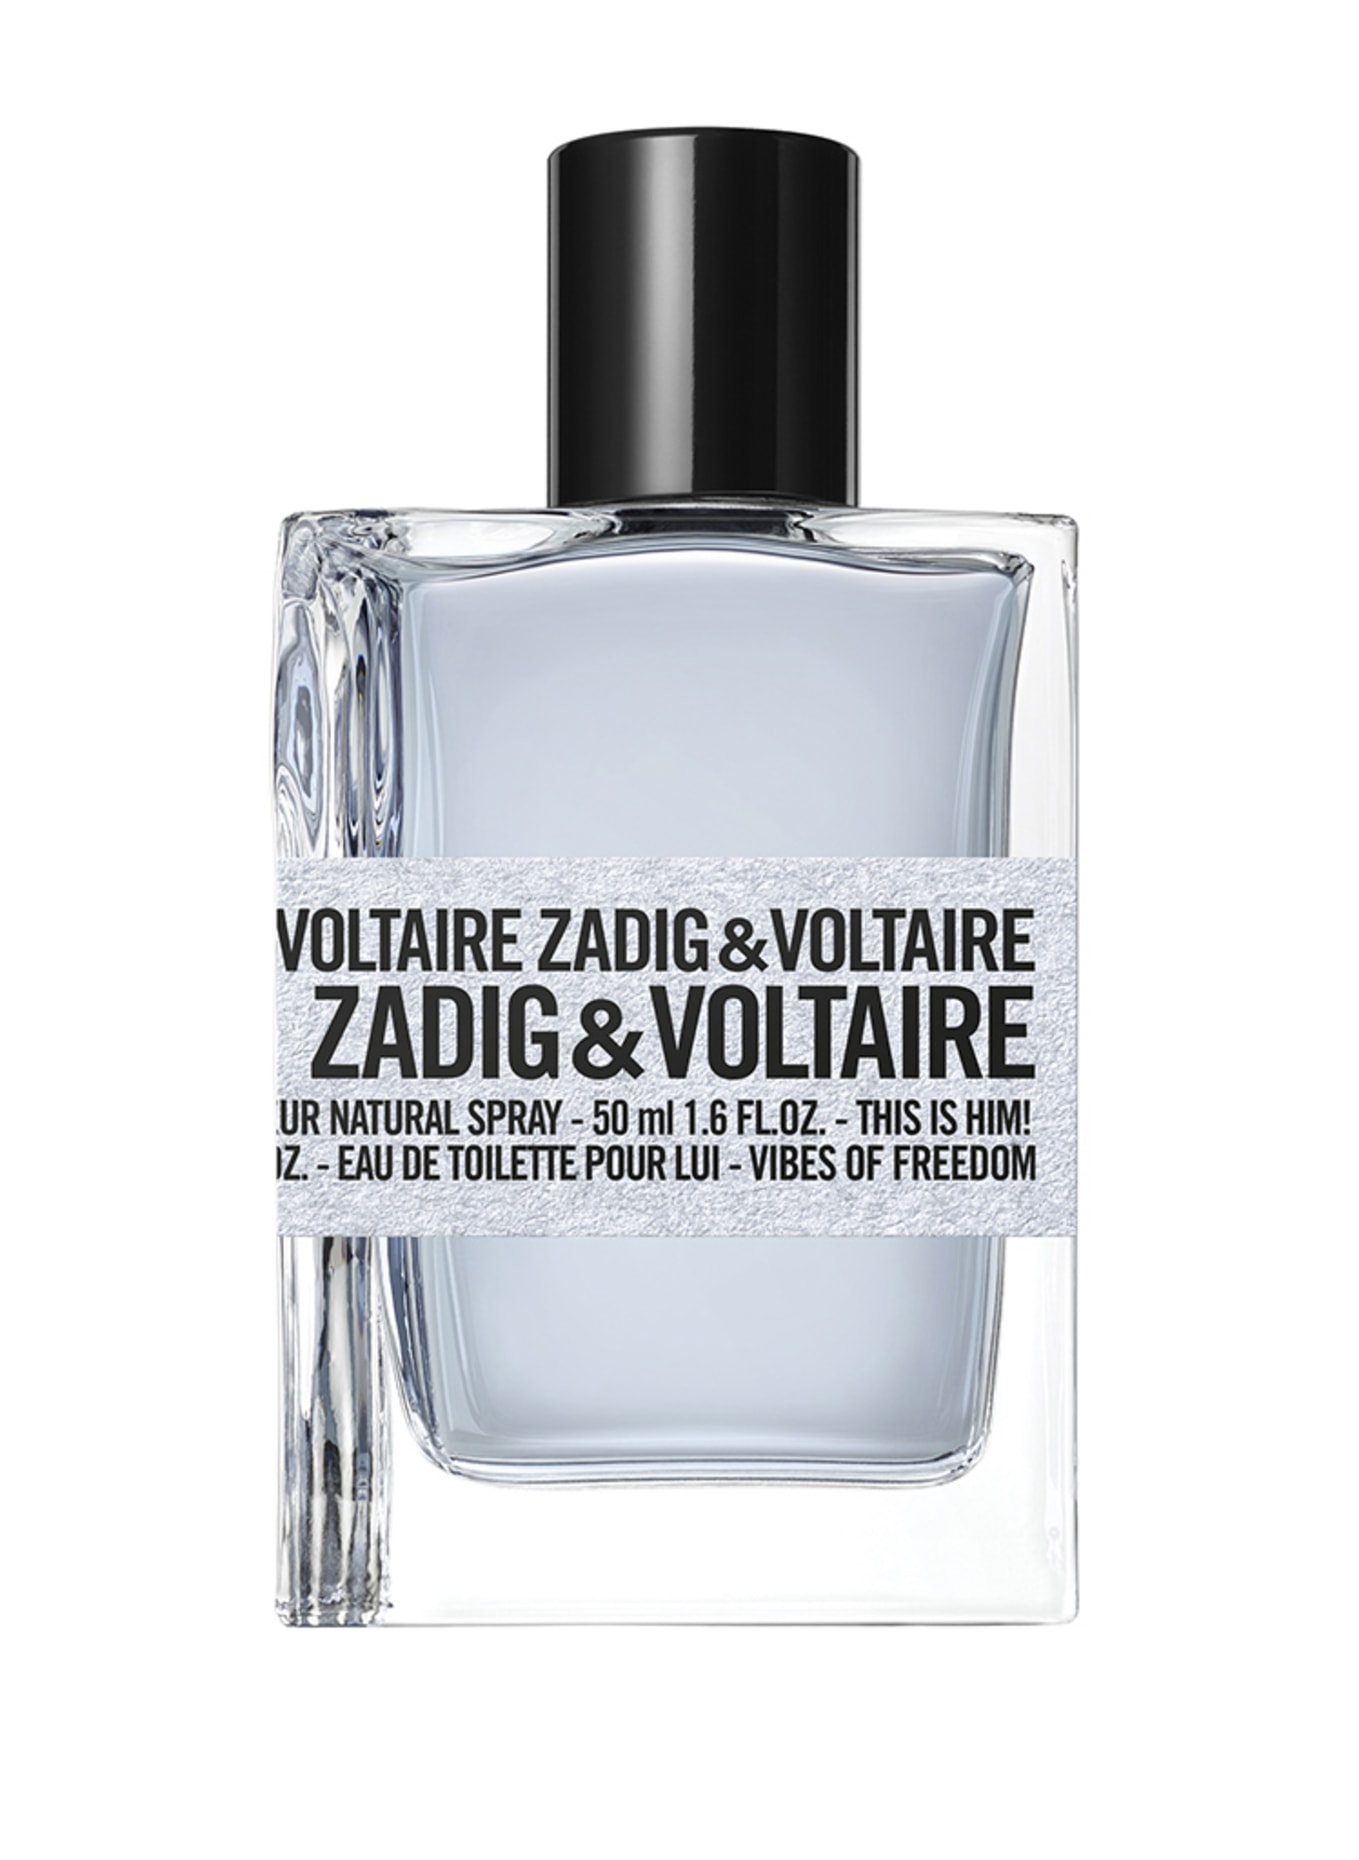 ZADIG & VOLTAIRE Fragrances THIS IS HIM! VIBES OF FREEDOM (Bild 1)